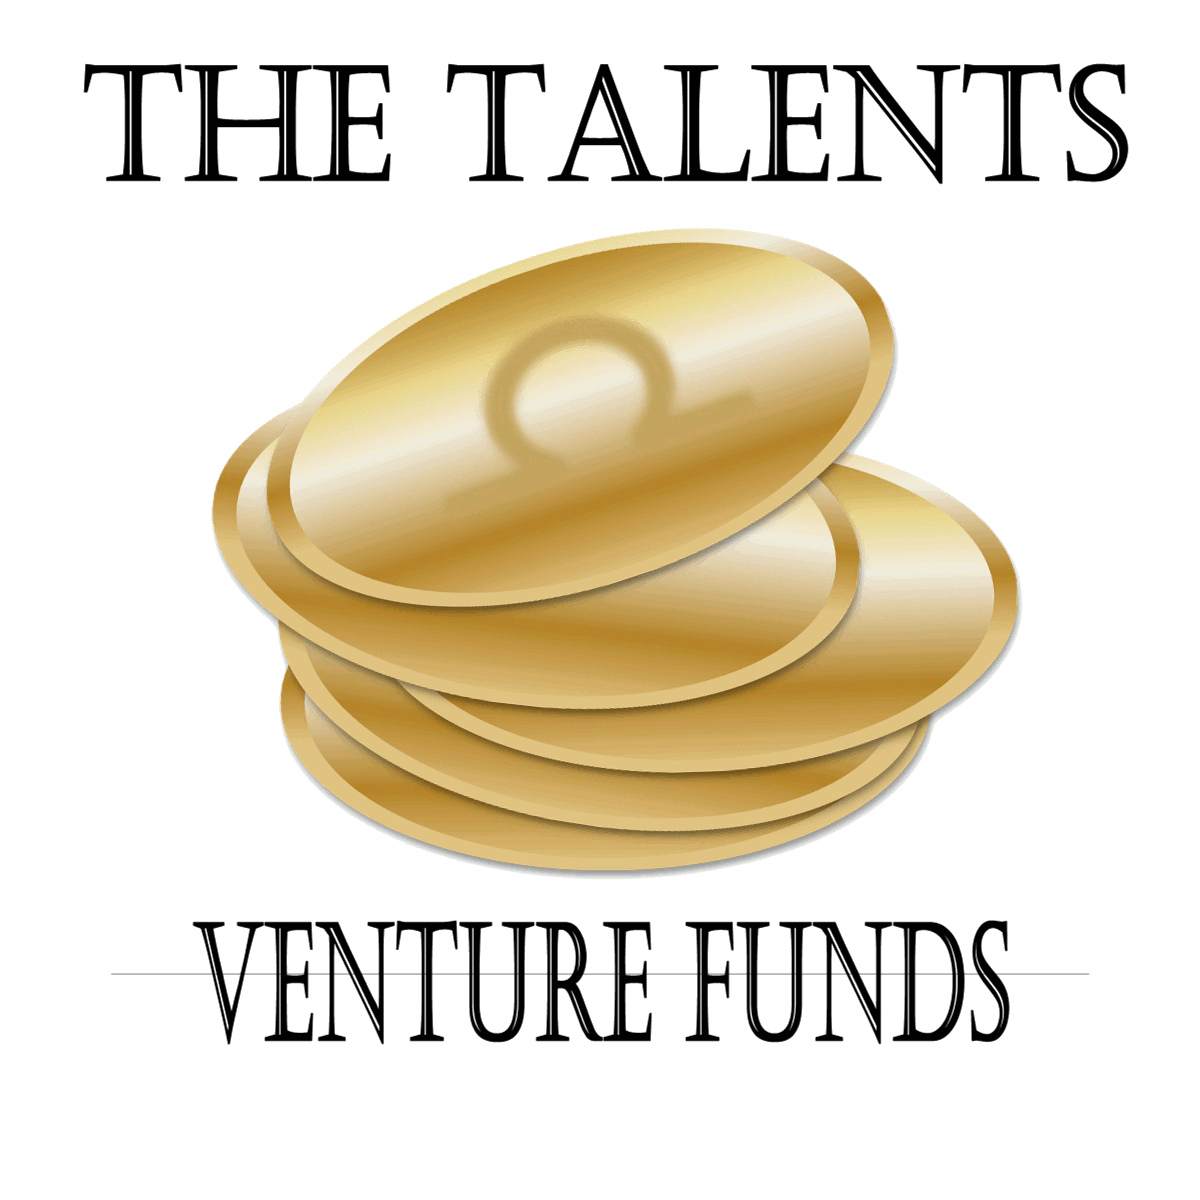 The Talents Venture Funds logo with gold coins